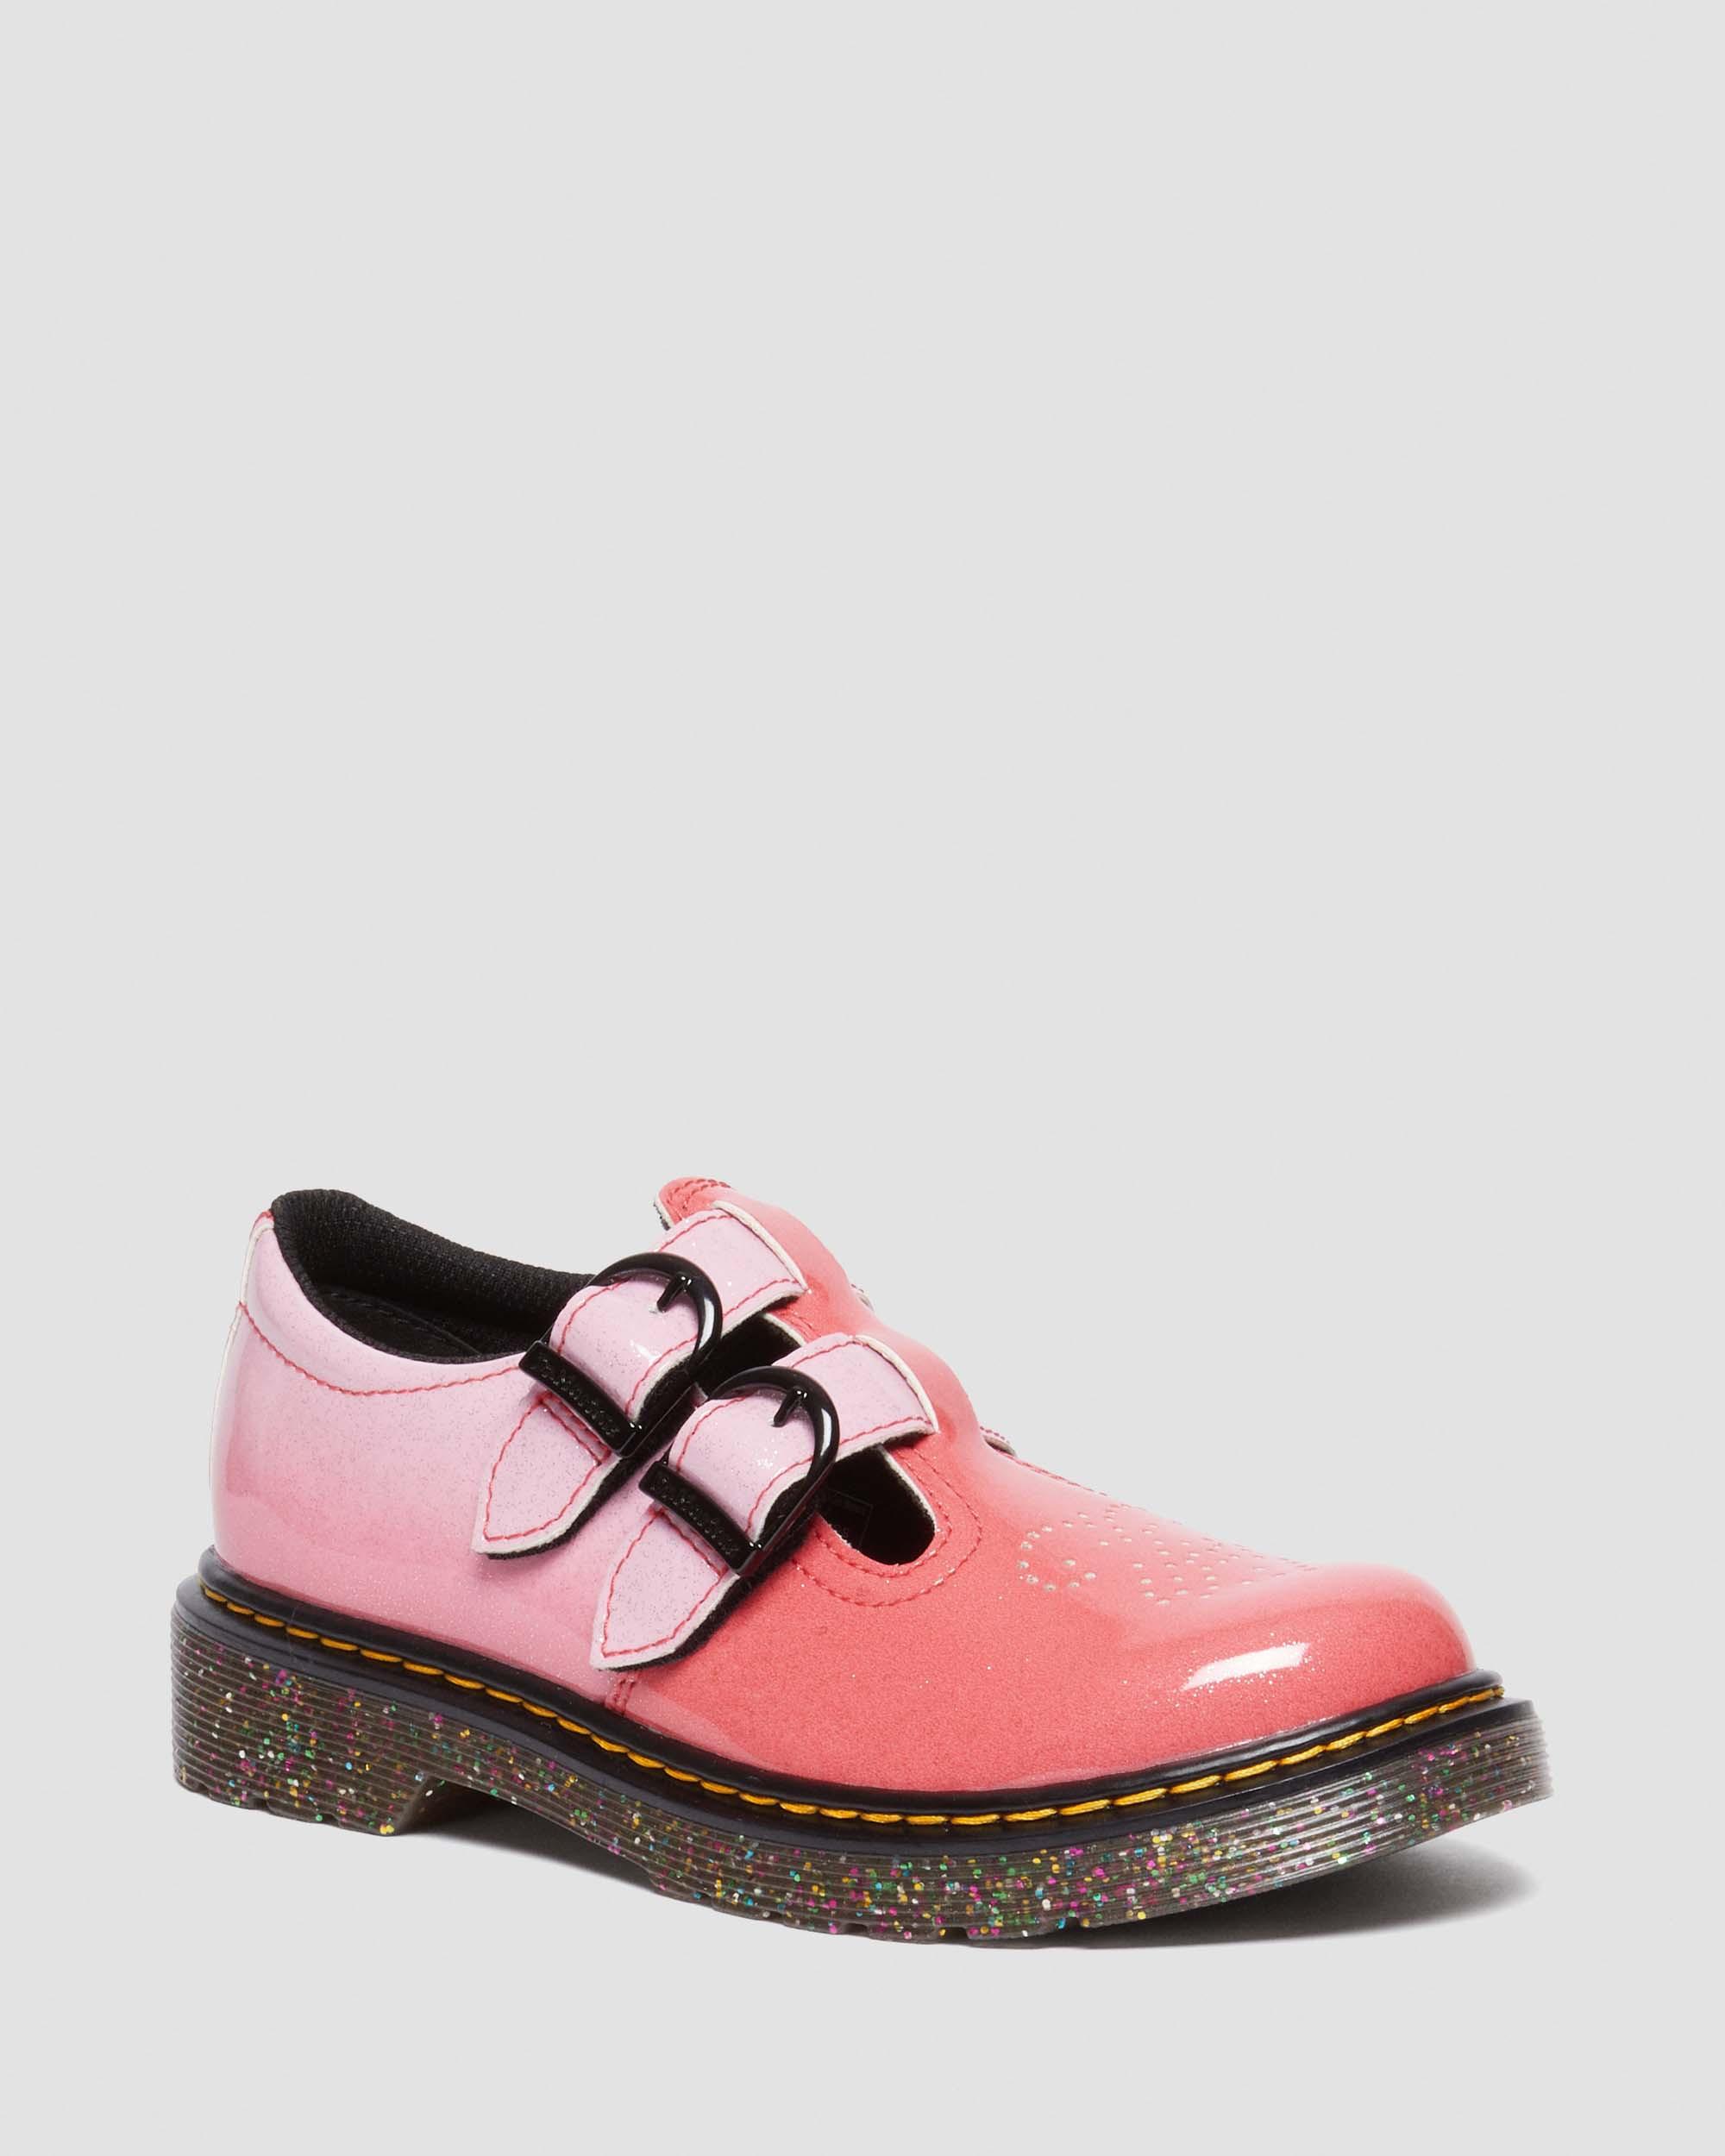 Junior 8065 Gradient Glitter Leather Mary Jane Shoes in Pink | Dr. Martens